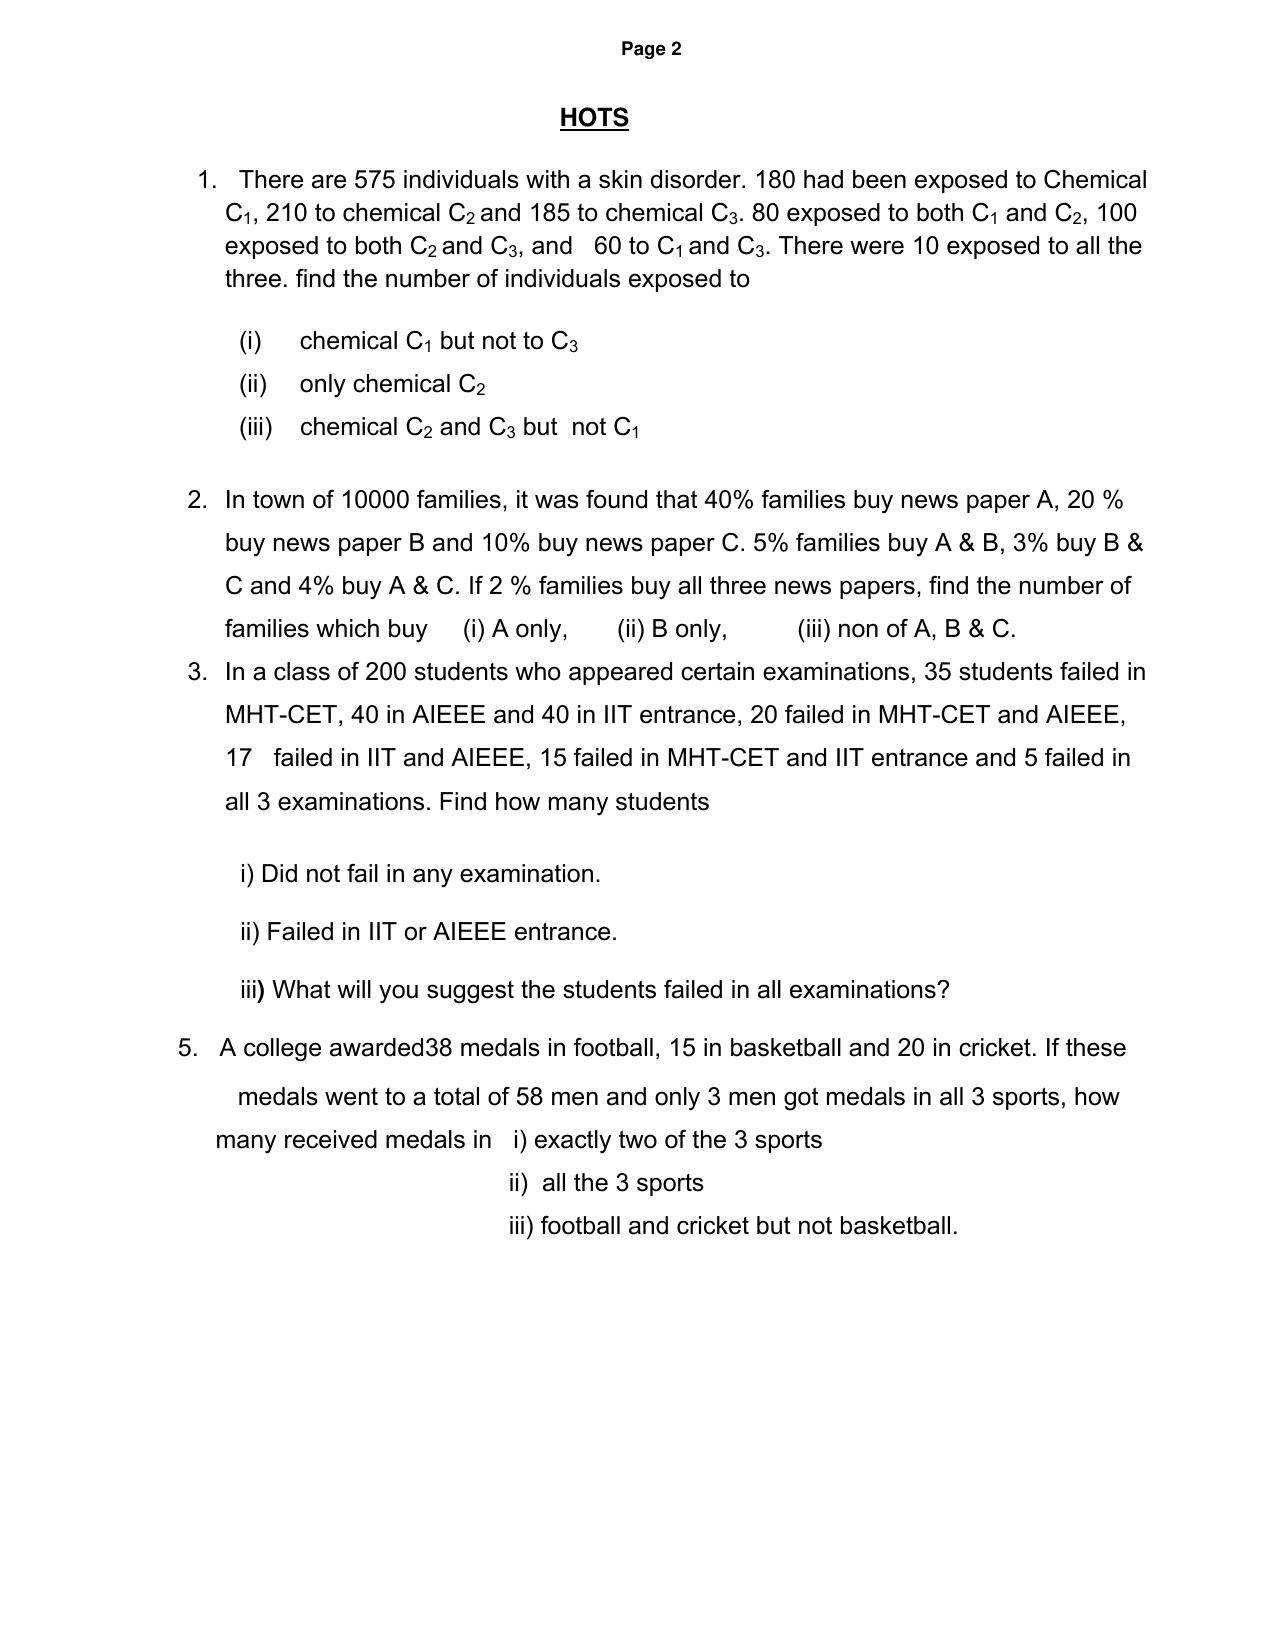 CBSE Worksheets for Class 11 Mathematics Sample Paper 2014 Assignment 3 - Page 2